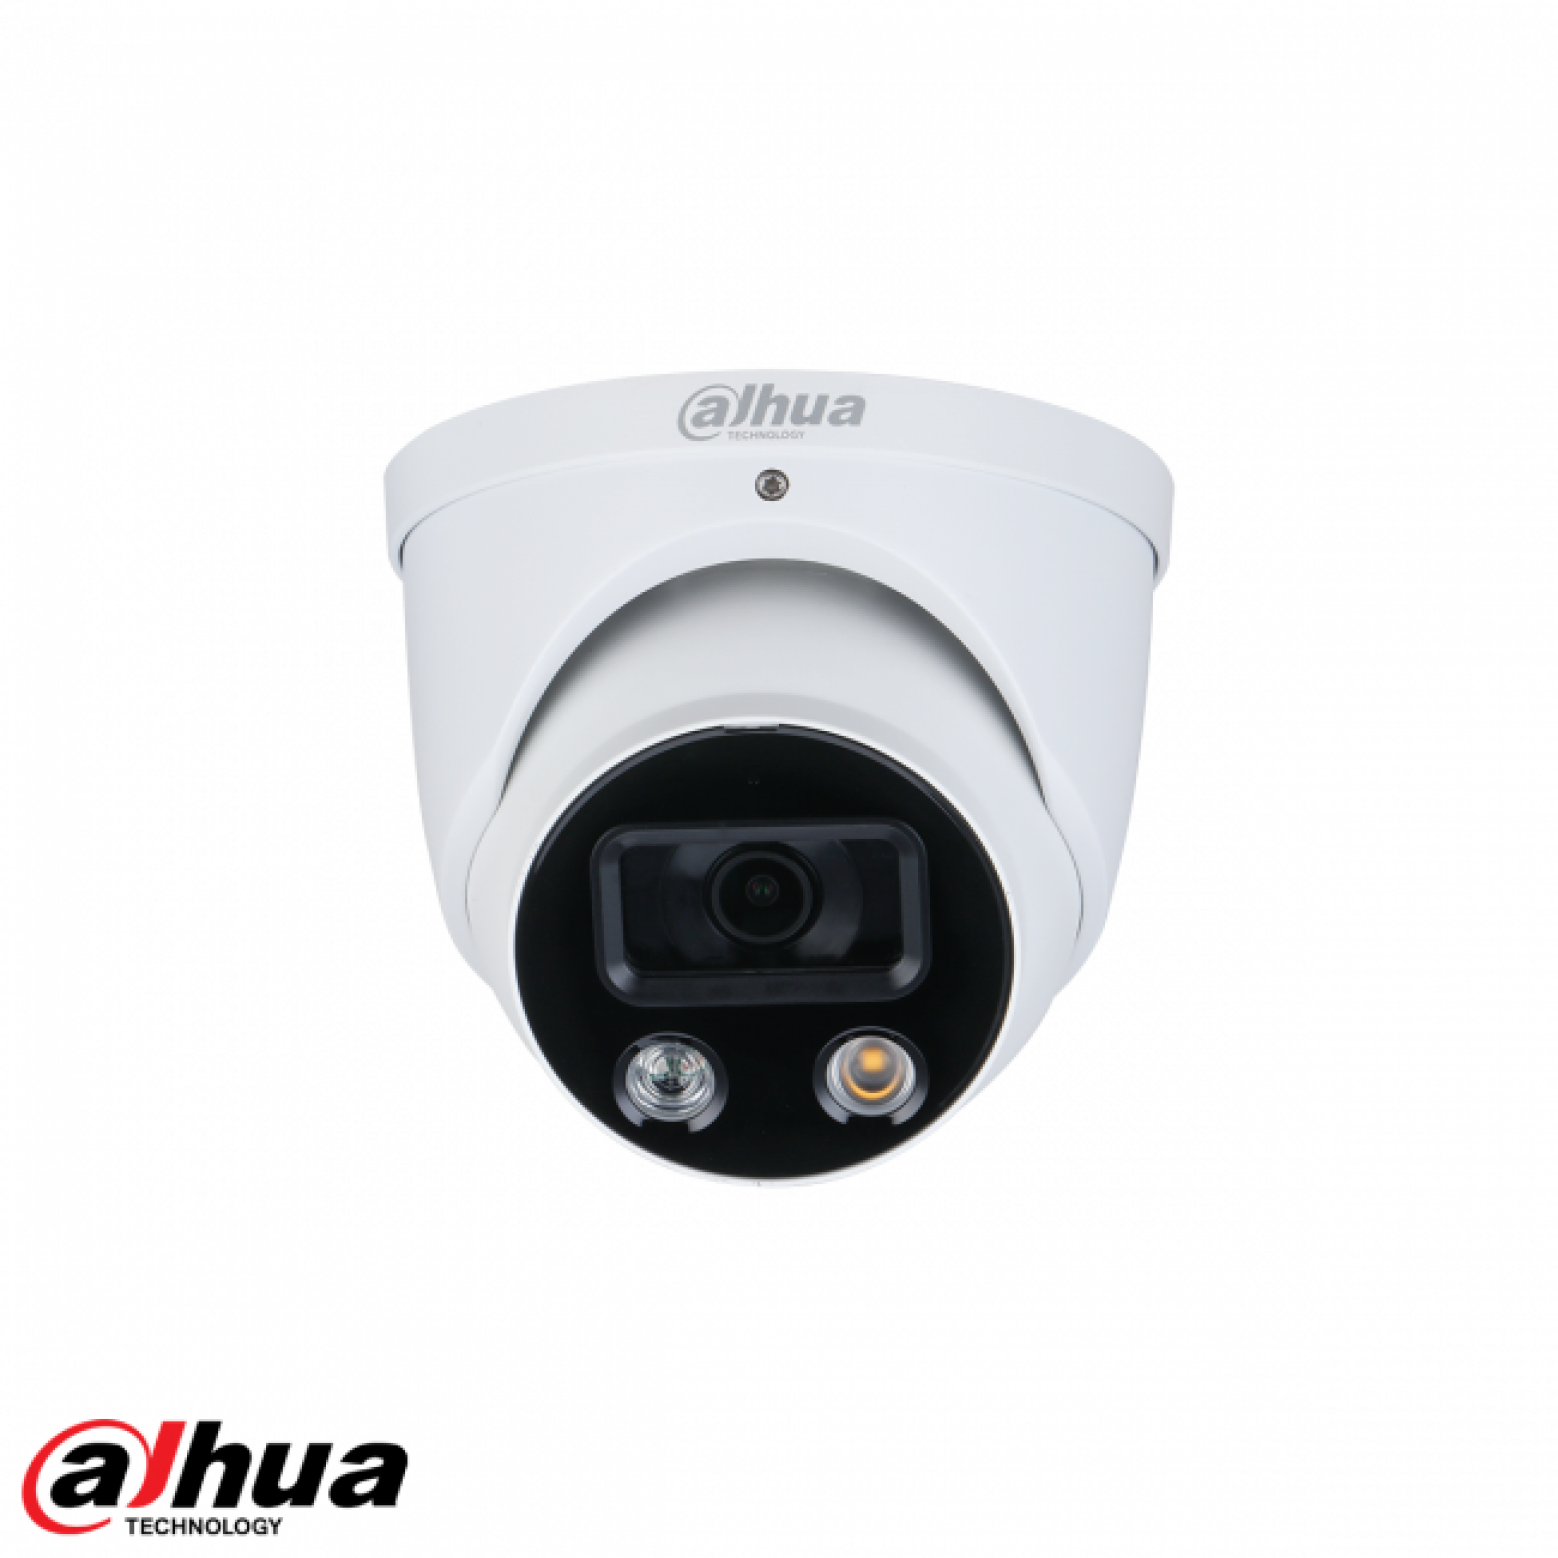 Dahua IPC-HDW3449HP-AS-PV-28 4MP Full-color Active Deterrence Fixed-focal Eyeball WizSense Network Camera 2.8mm